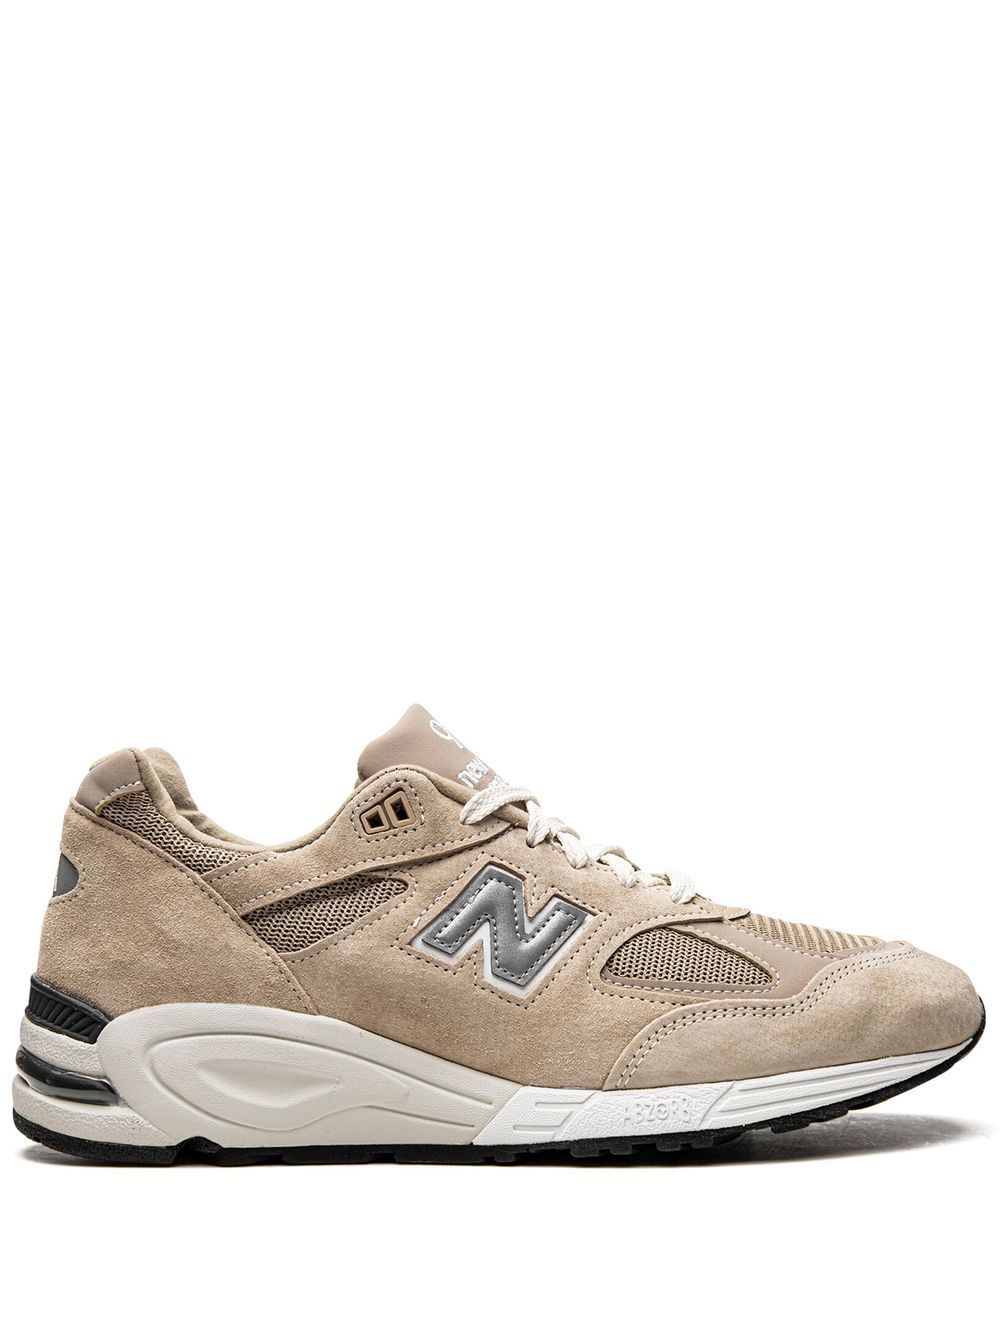 New Balance x Kith 990v2 low-top sneakers - Neutrals